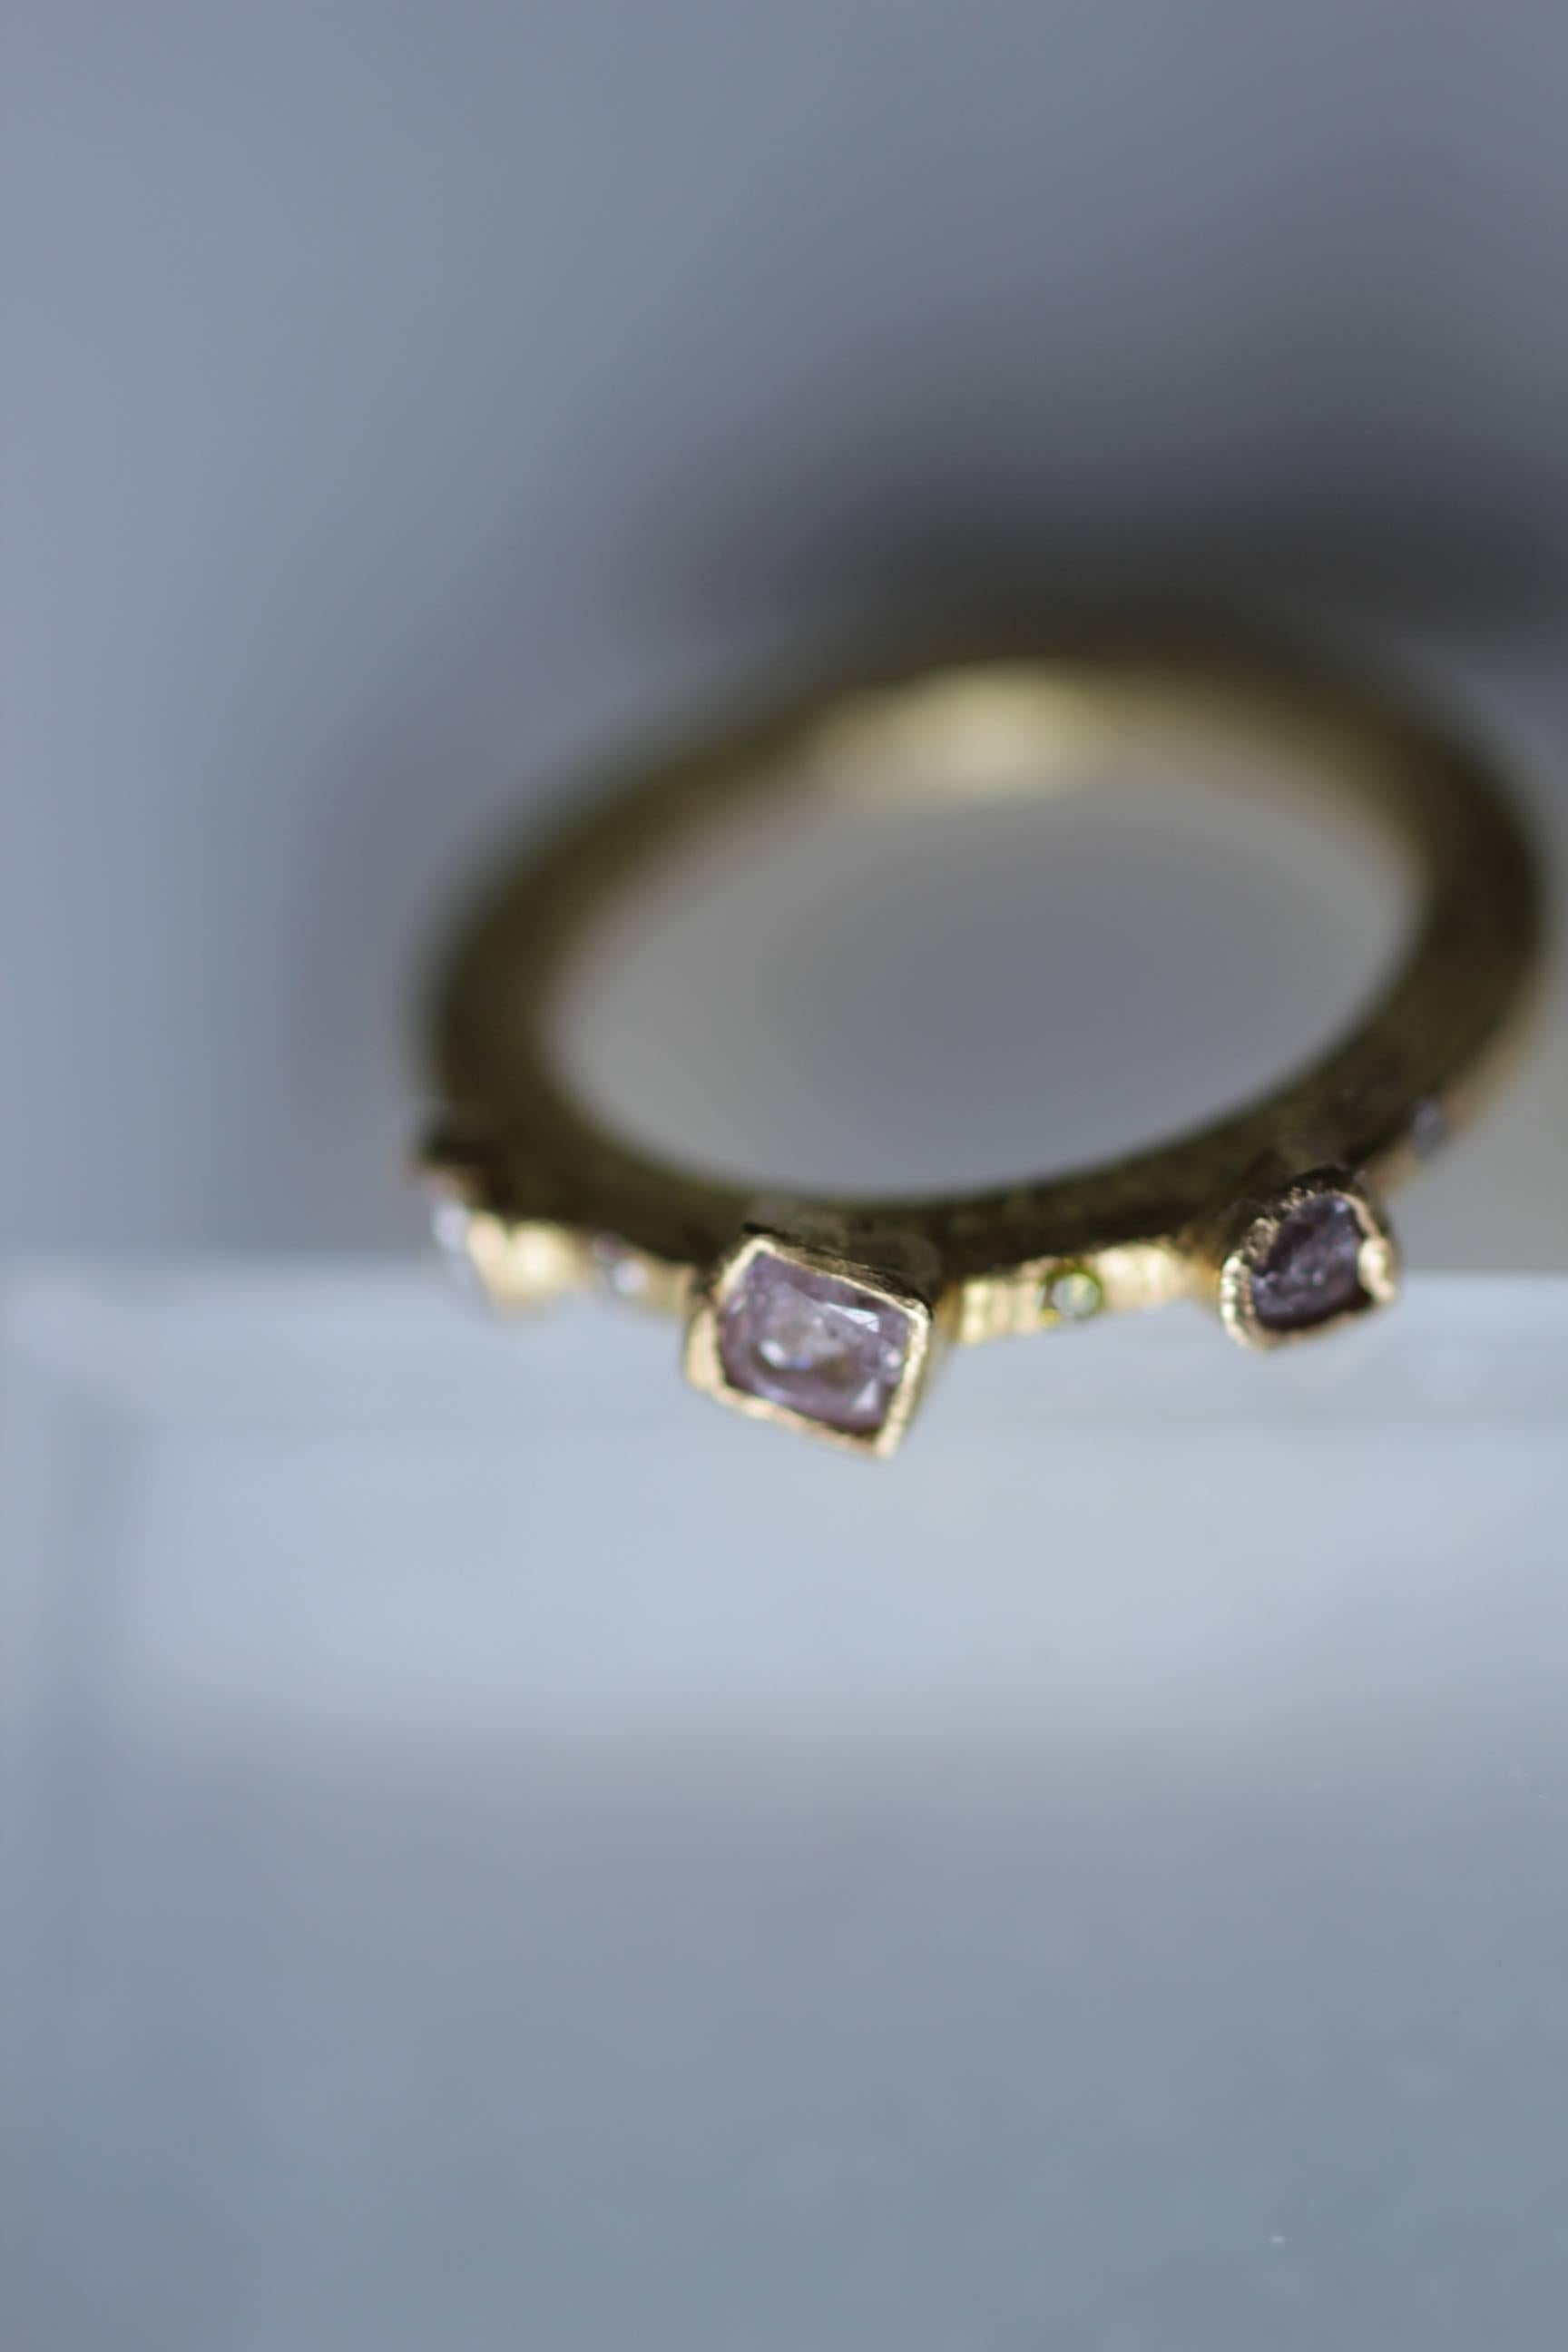 Custom listing. Handmade engagement bridal ring with three-stone bezel-set pink diamonds in 22K recycled gold and four flush-set diamonds. 

Custom order. This striking three-stone engagement ring can be ordered in any size. Made of recycled 22k